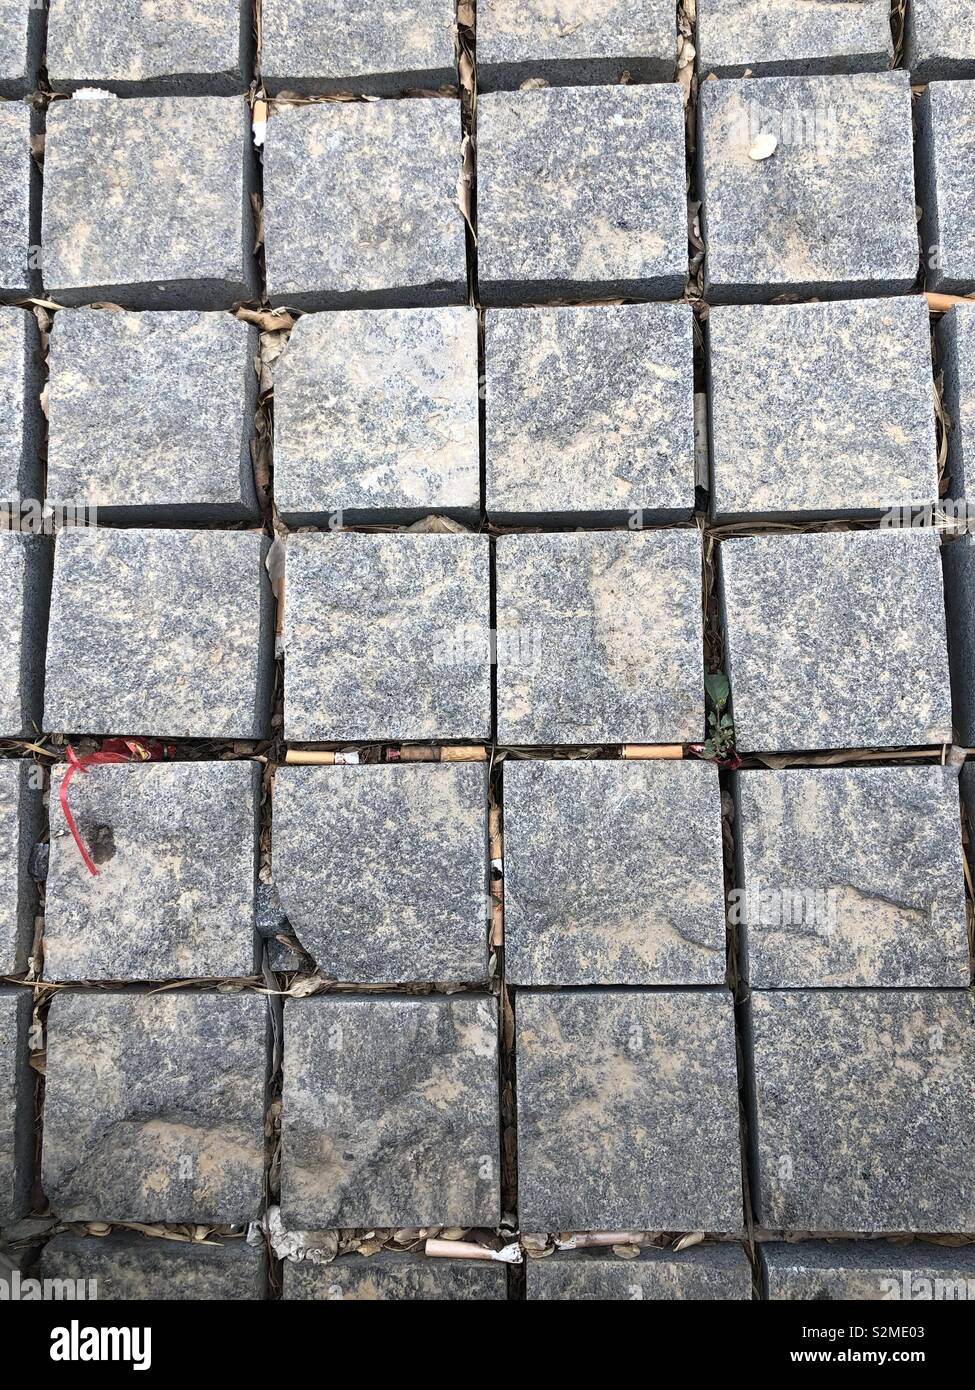 Square paving stones with discarded cigarette butts . Stock Photo